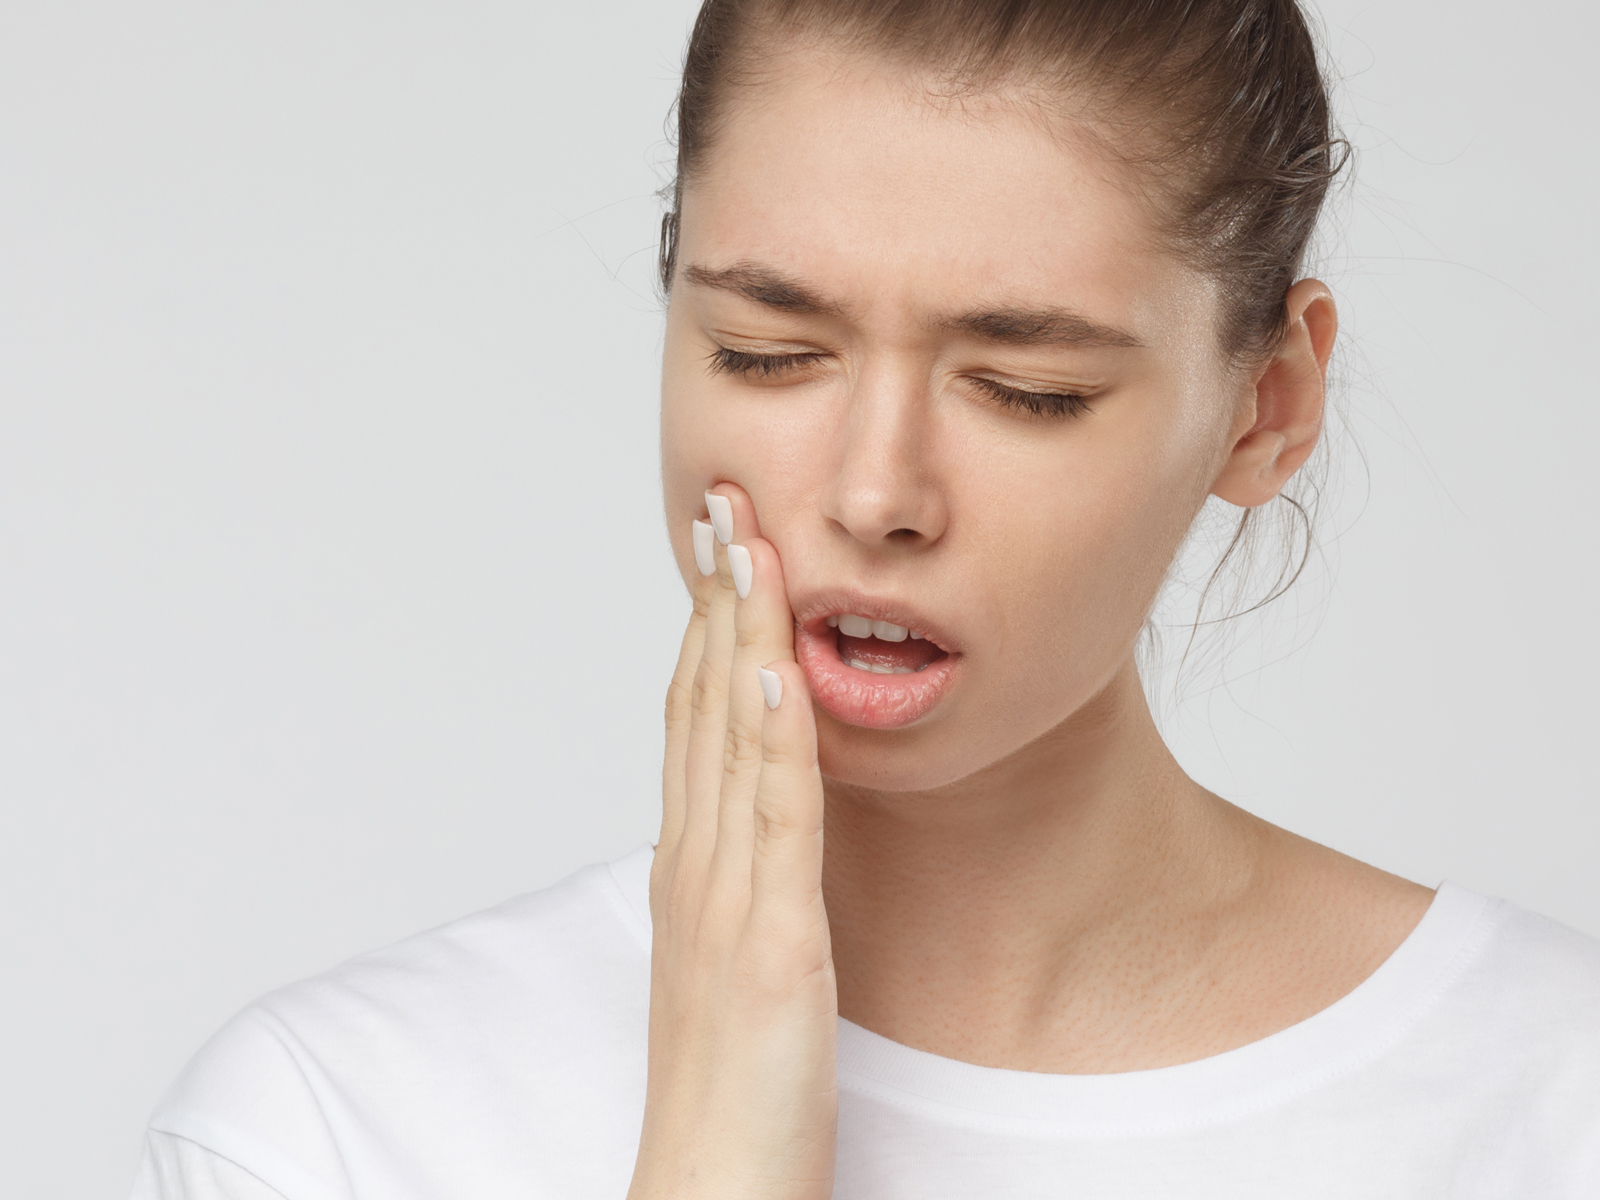 What Can I Do to Prevent Dental Problems?